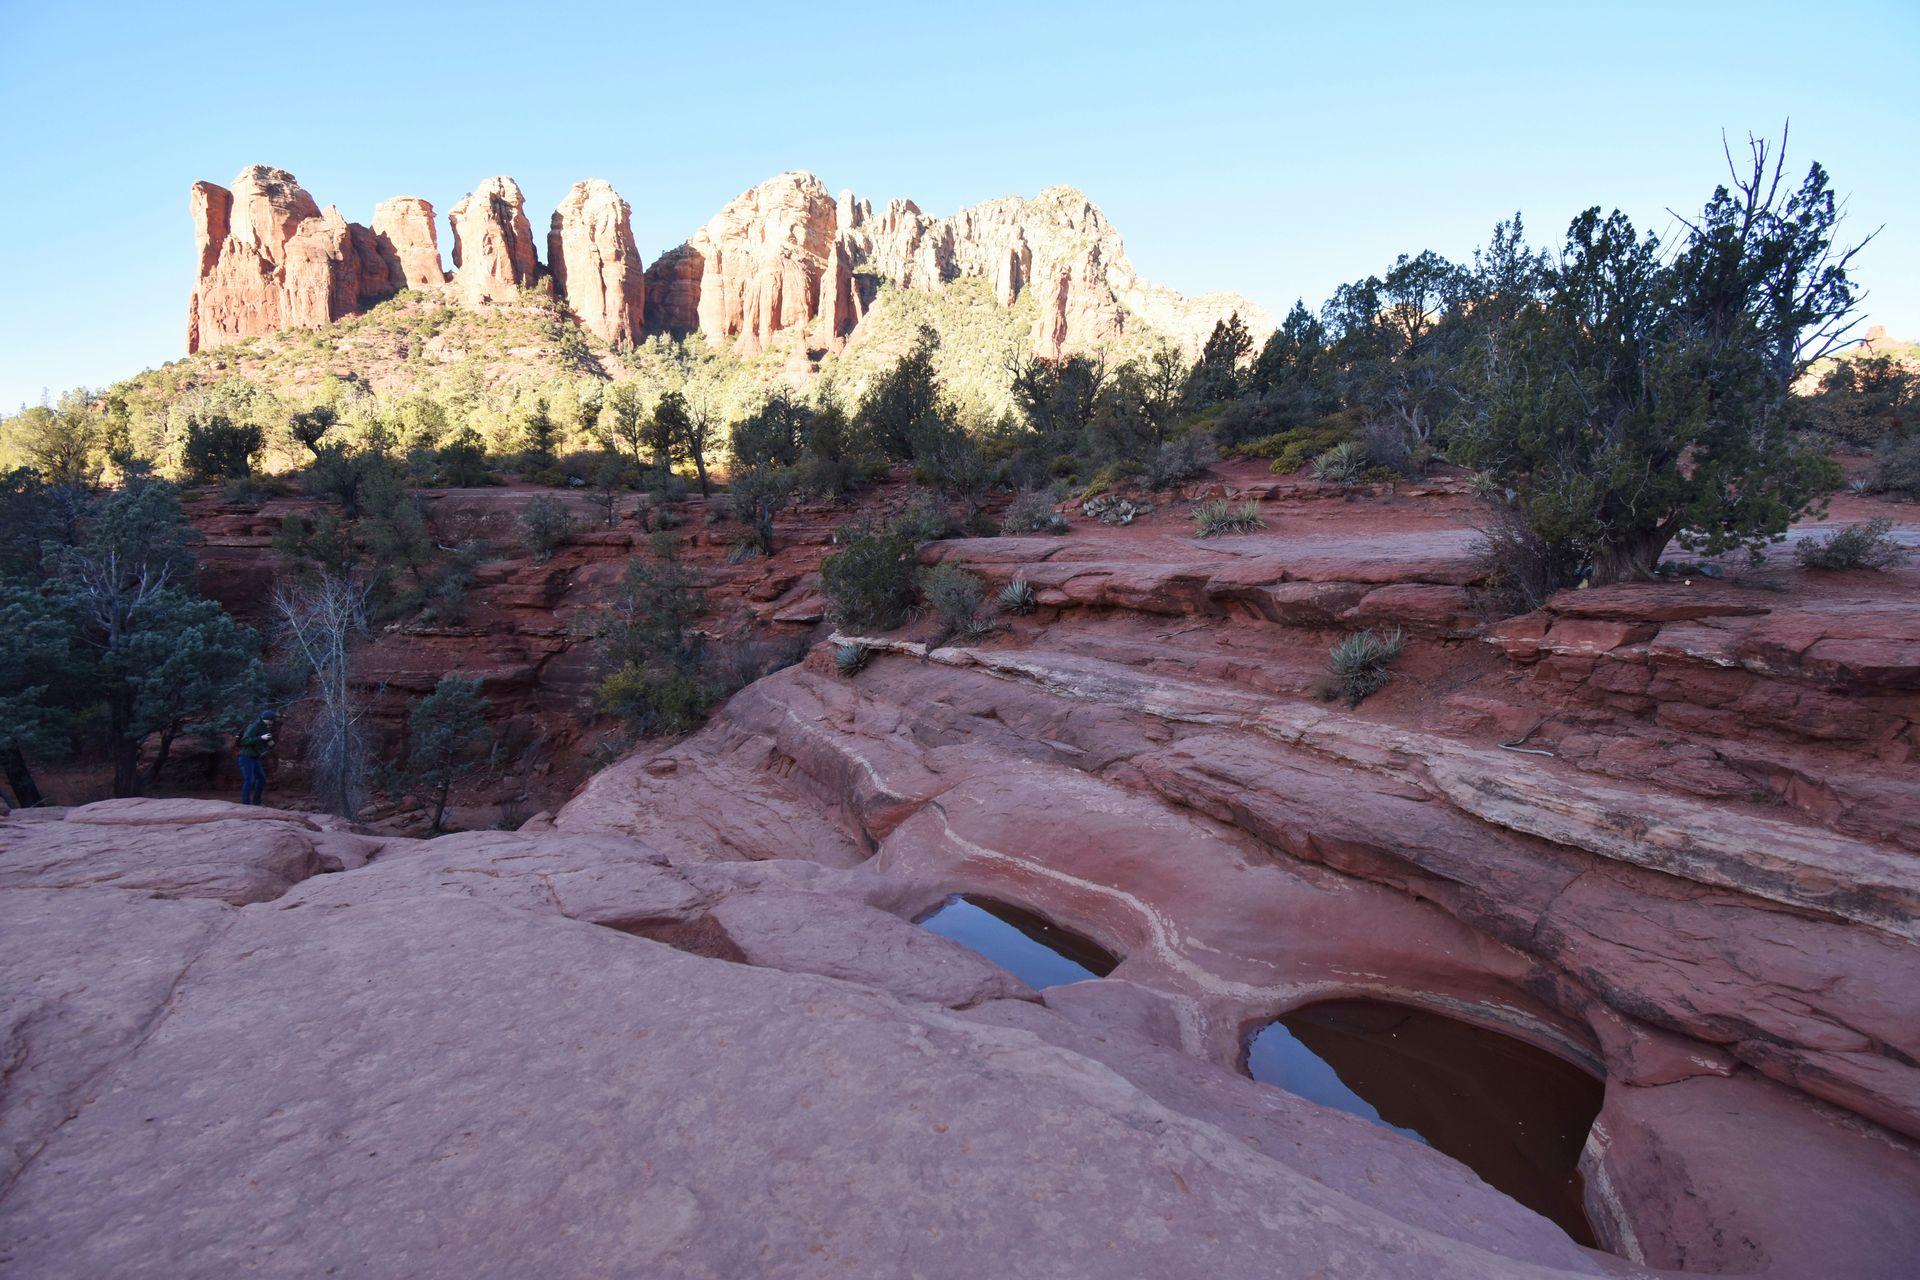 Two pools of water with jagged orange cliffs in the background.